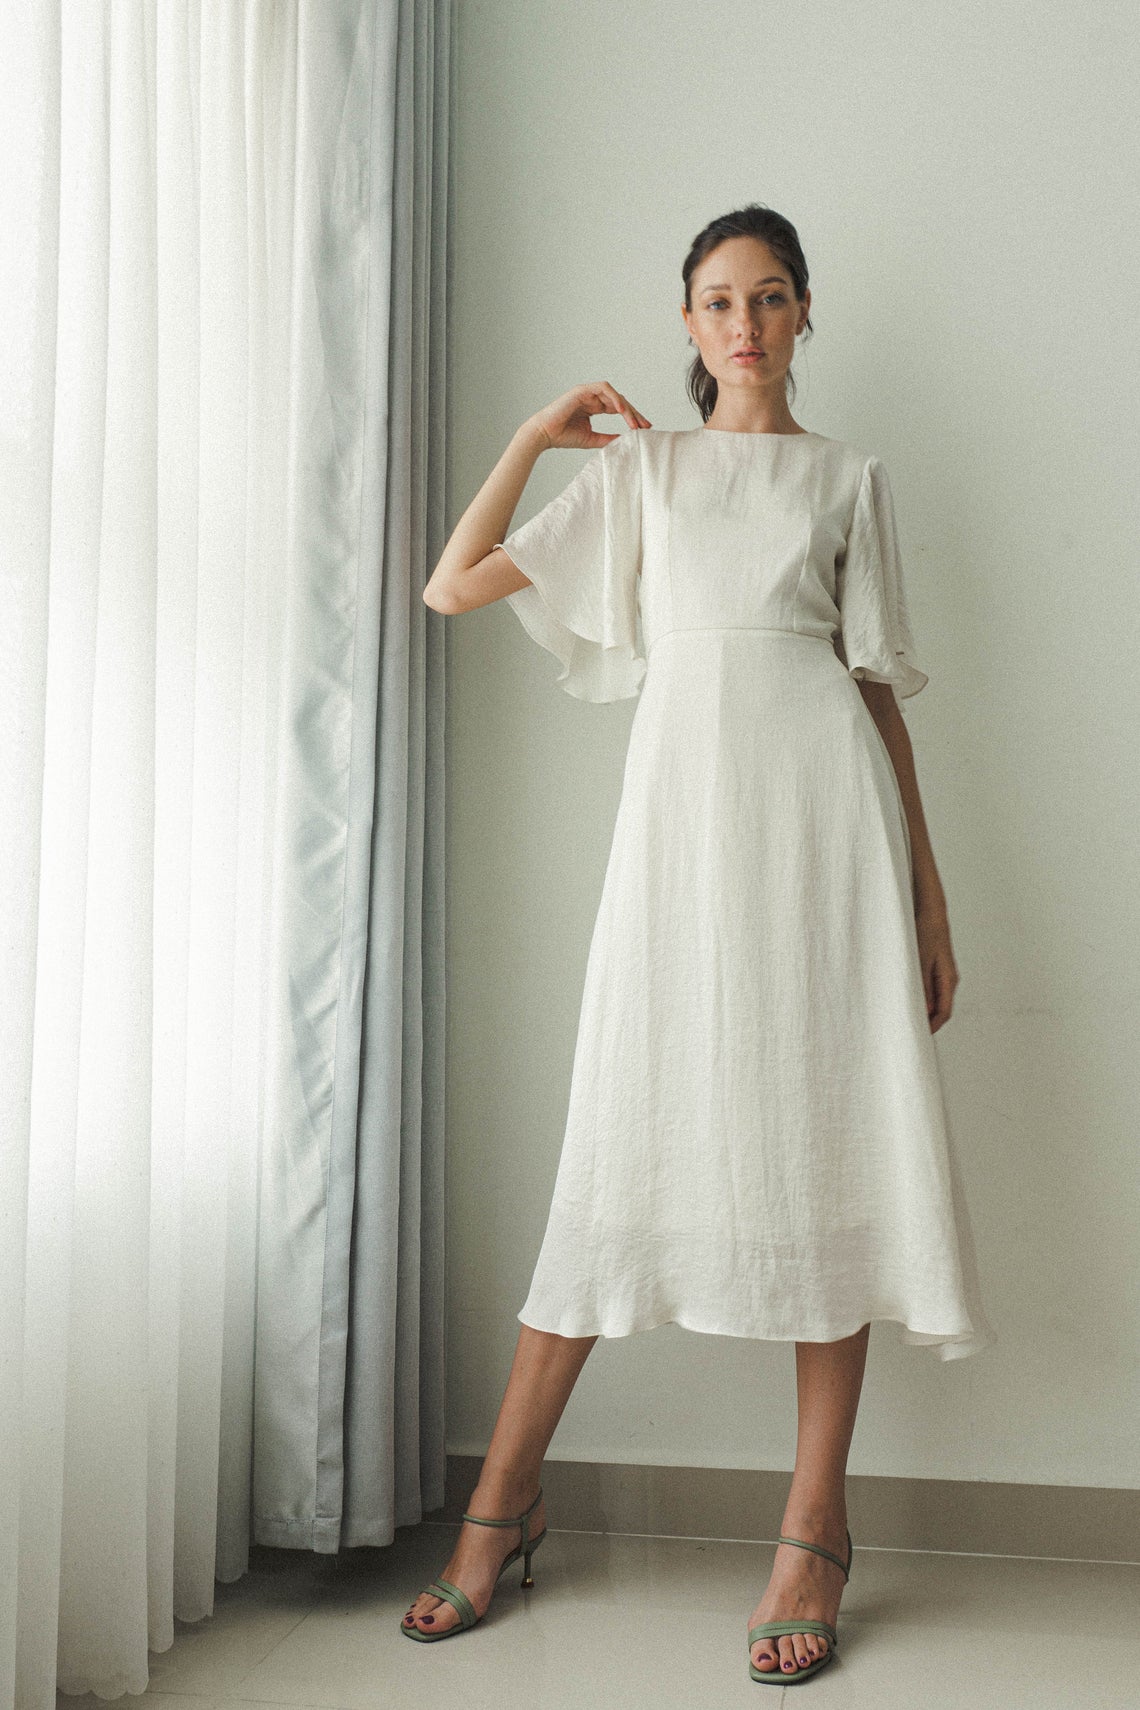 flutter sleeve courthouse wedding outfit